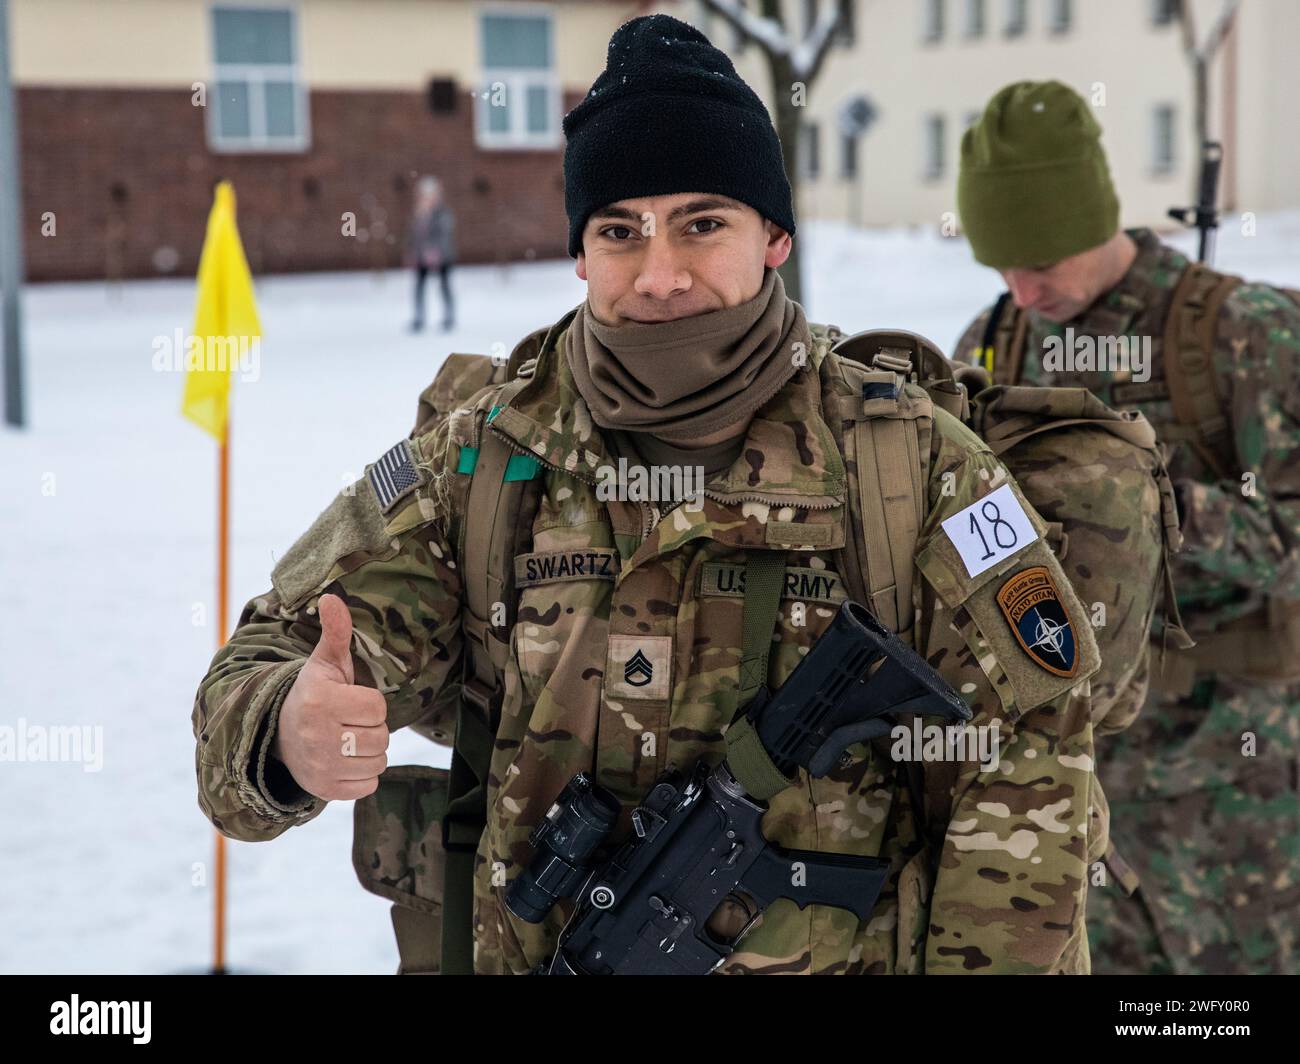 U.S. Army Staff Sgt. Eli J. Swartz, a fire direction controller with Headquarters and Headquarters “Hazard” Company, 2nd Battalion, 69th Armored Regiment “Panther Battalion,” 2nd Armored Brigade Combat Team, 3rd Infantry Division, gives a thumbs-up before beginning the Croatian “Winter Challenge” at Bemowo Piskie Training Area, Poland, Jan. 5, 2024. The Croatian “Winter Challenge” is a 15-kilometer competition consisting of seven events: land navigation, small arms firing, wall climbing, obstacle course while wearing a gas mask, rope crossing, low-crawl and obstacle climbing, and a hand grenad Stock Photo